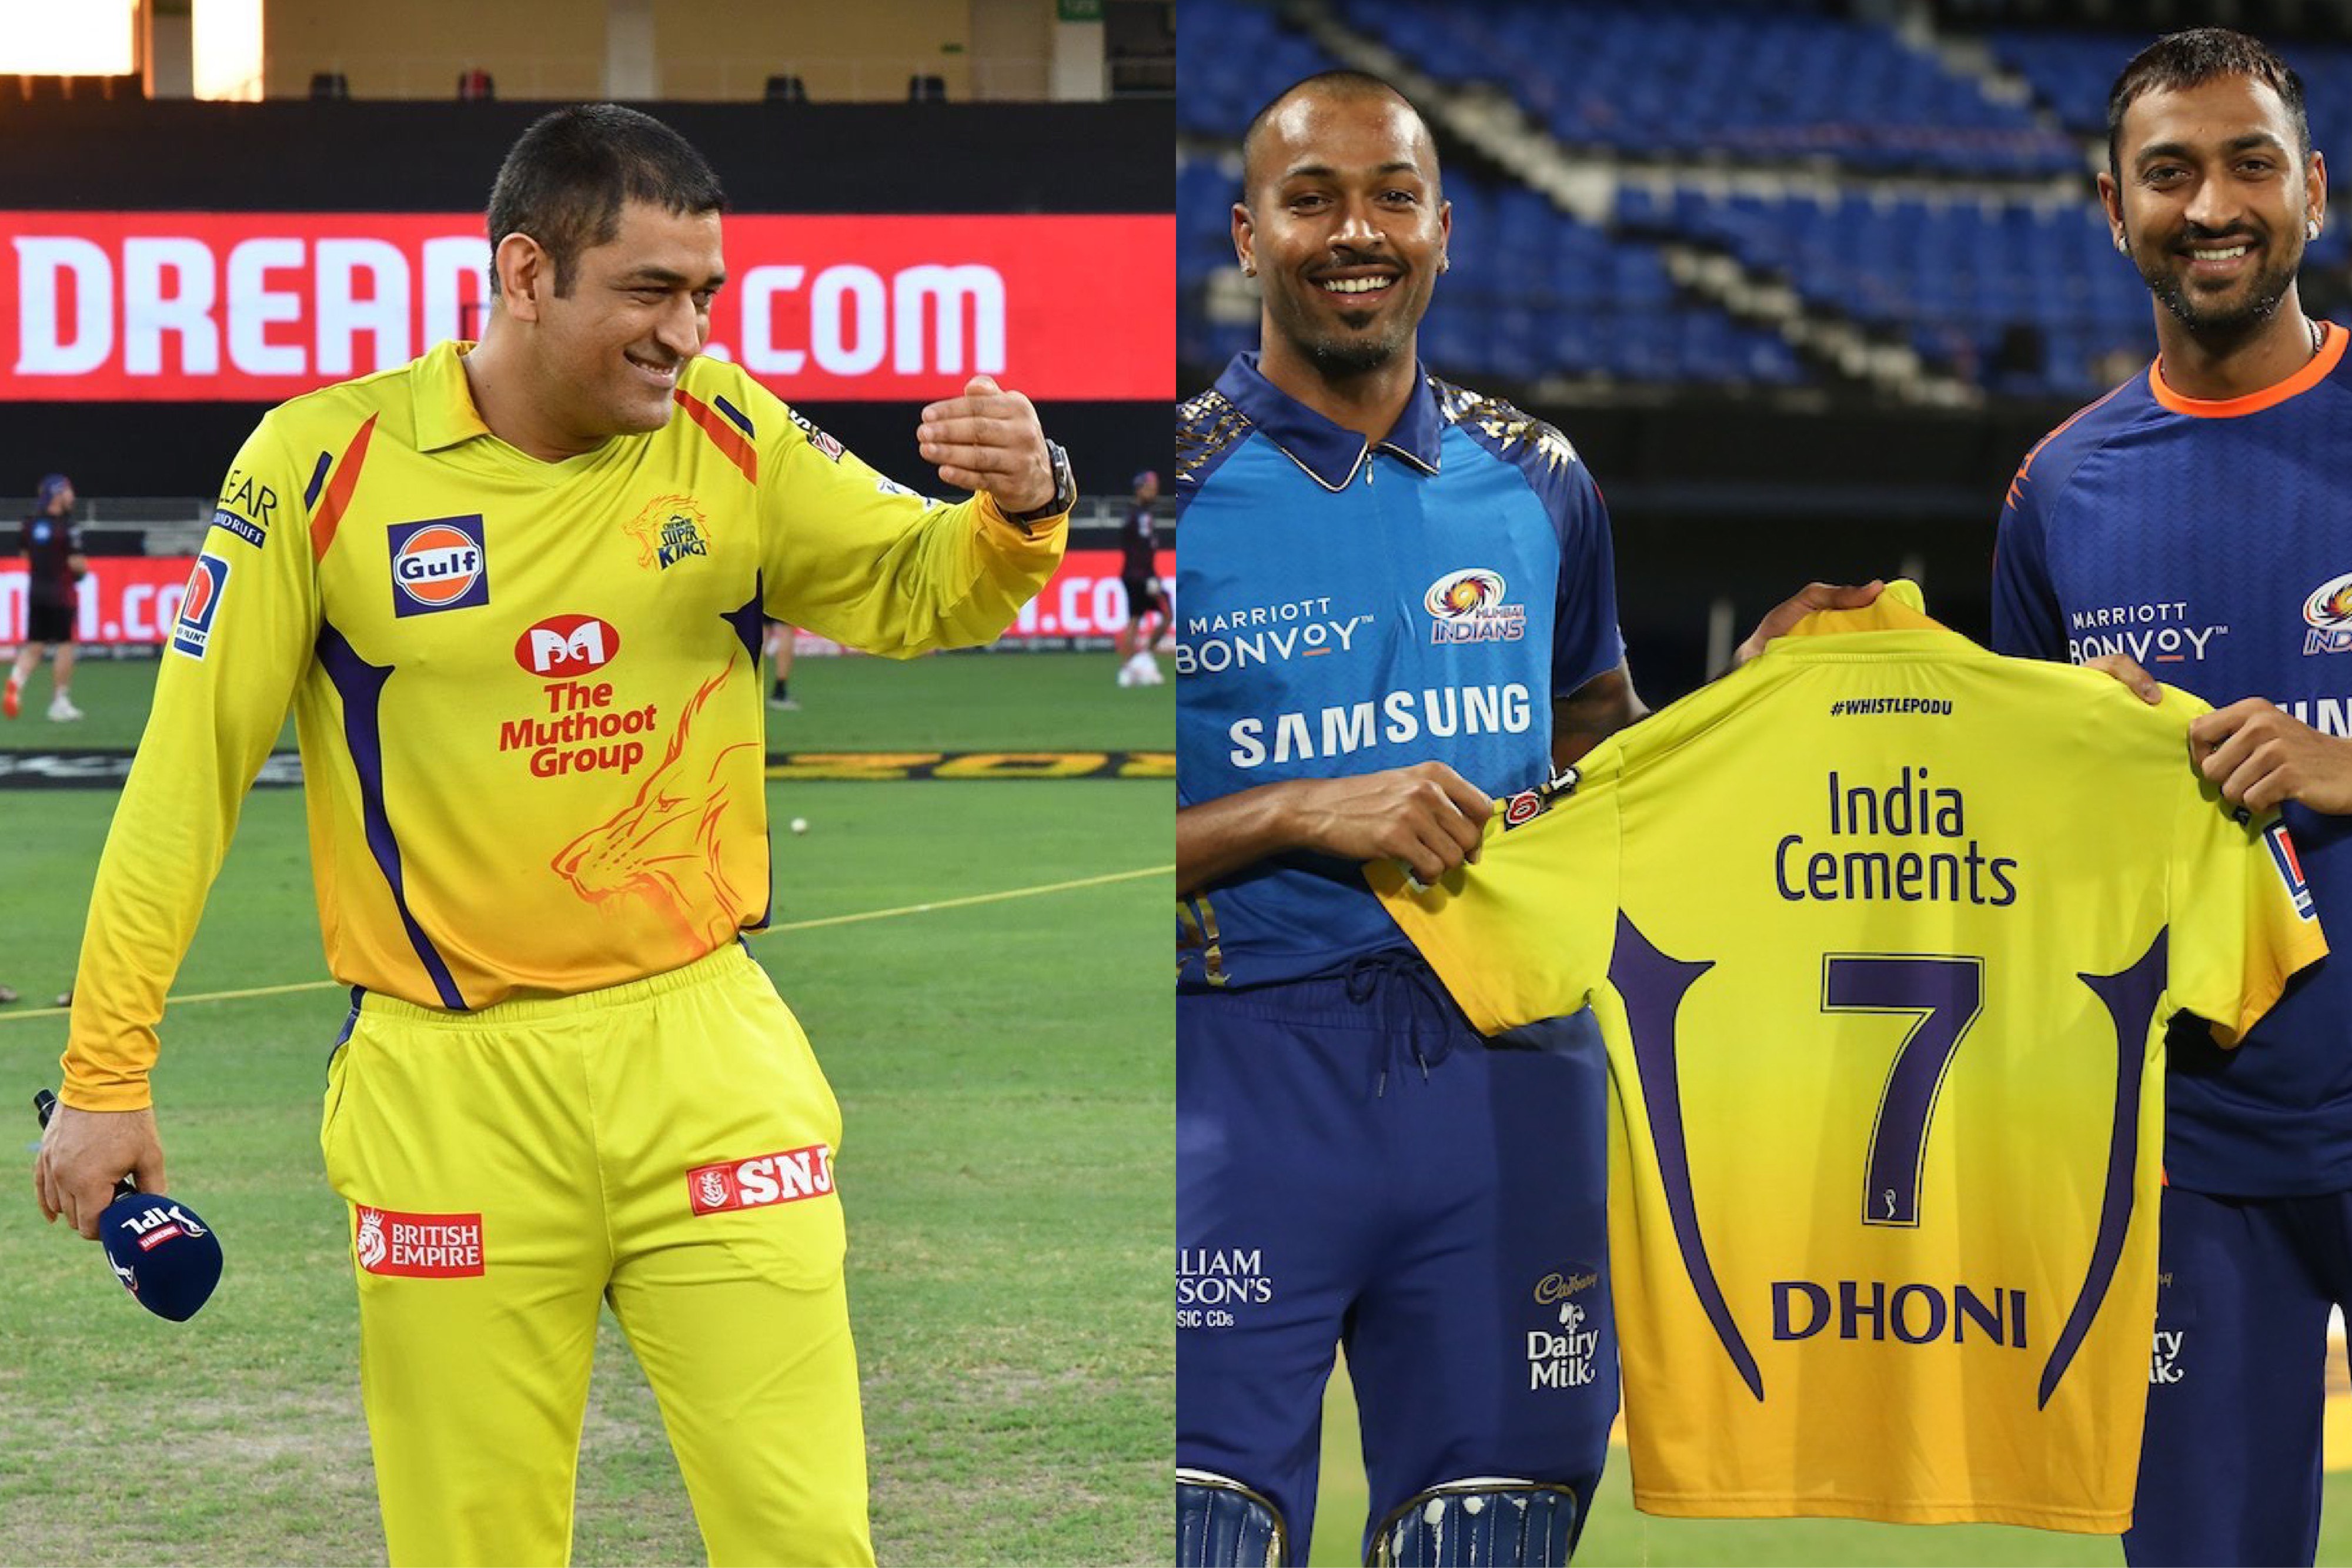 MS Dhoni gifted his jersey away to many players | BCCI/IPL